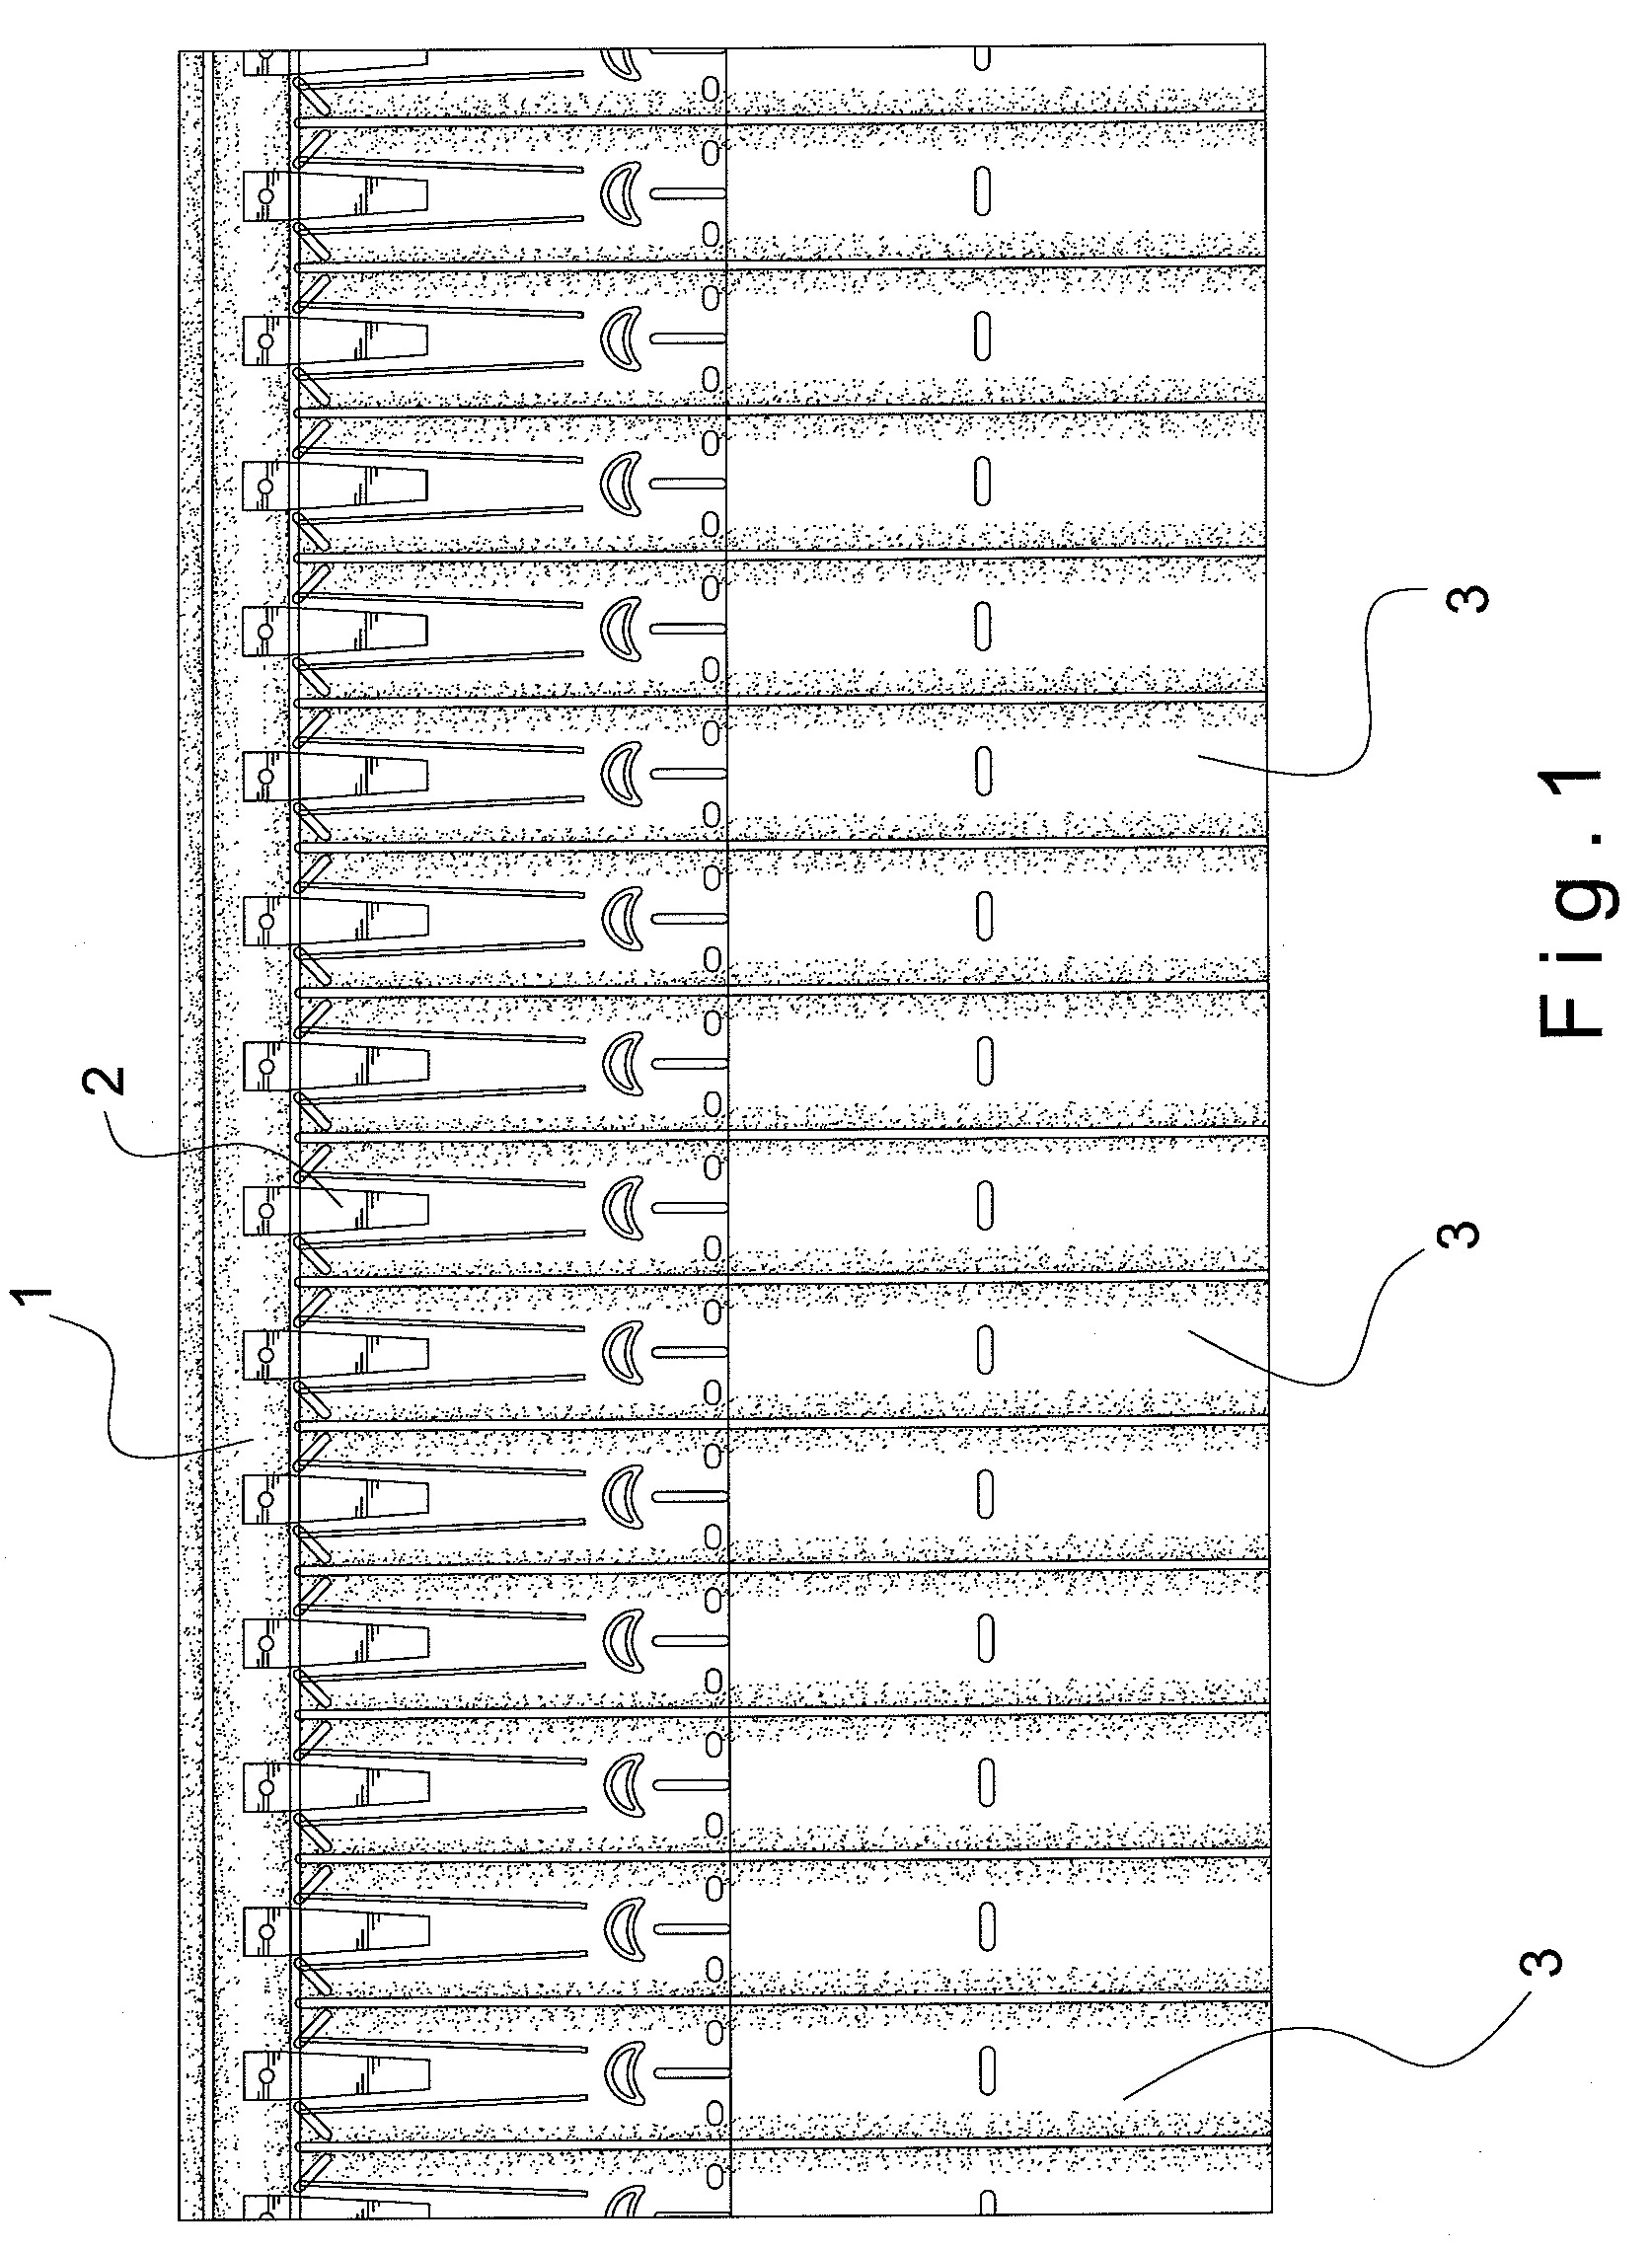 Air Packaging Device Product and Method for Forming the Product